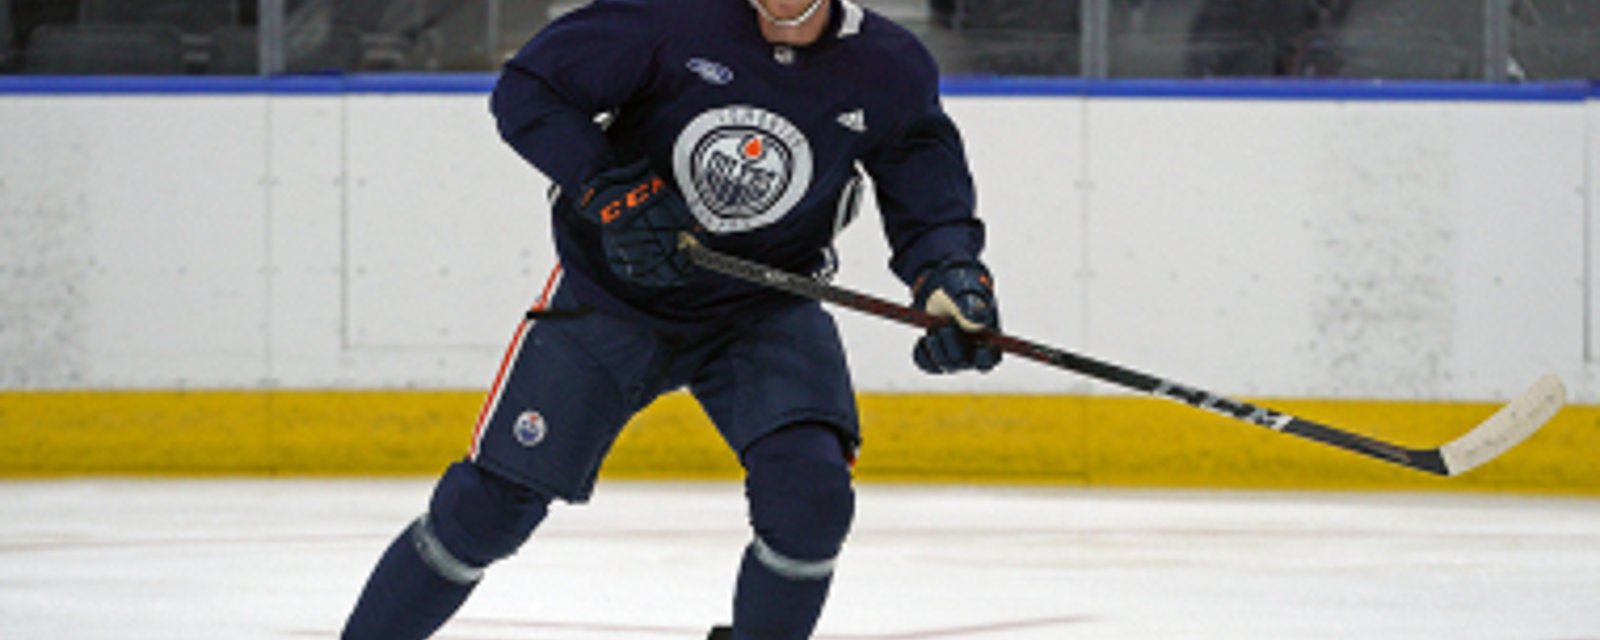 Insider reveals what’s going on with Connor McDavid ahead of playoffs